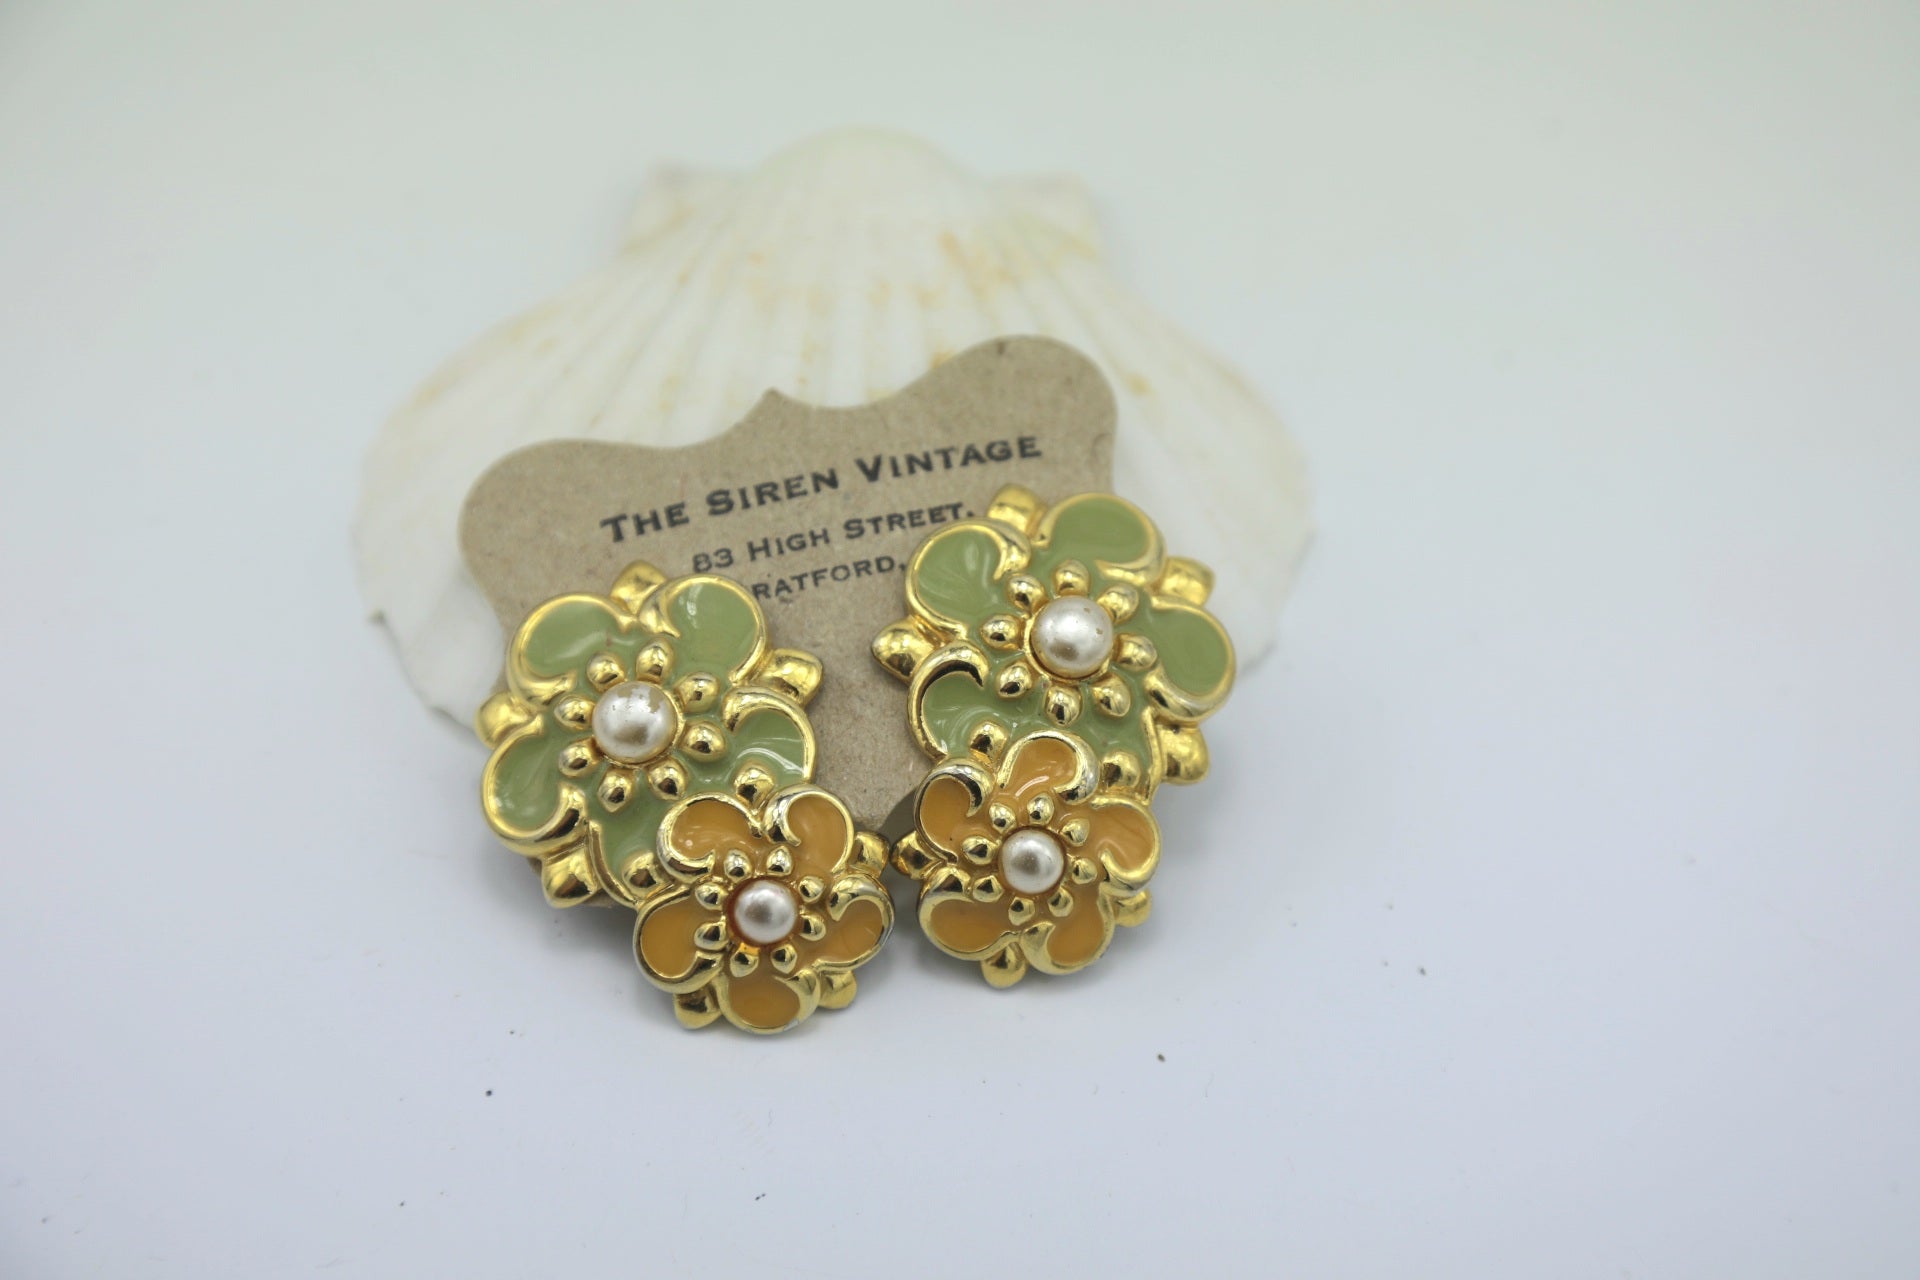 Clip on - statement floral Earrings - 1960s jewellery - Retro Mod